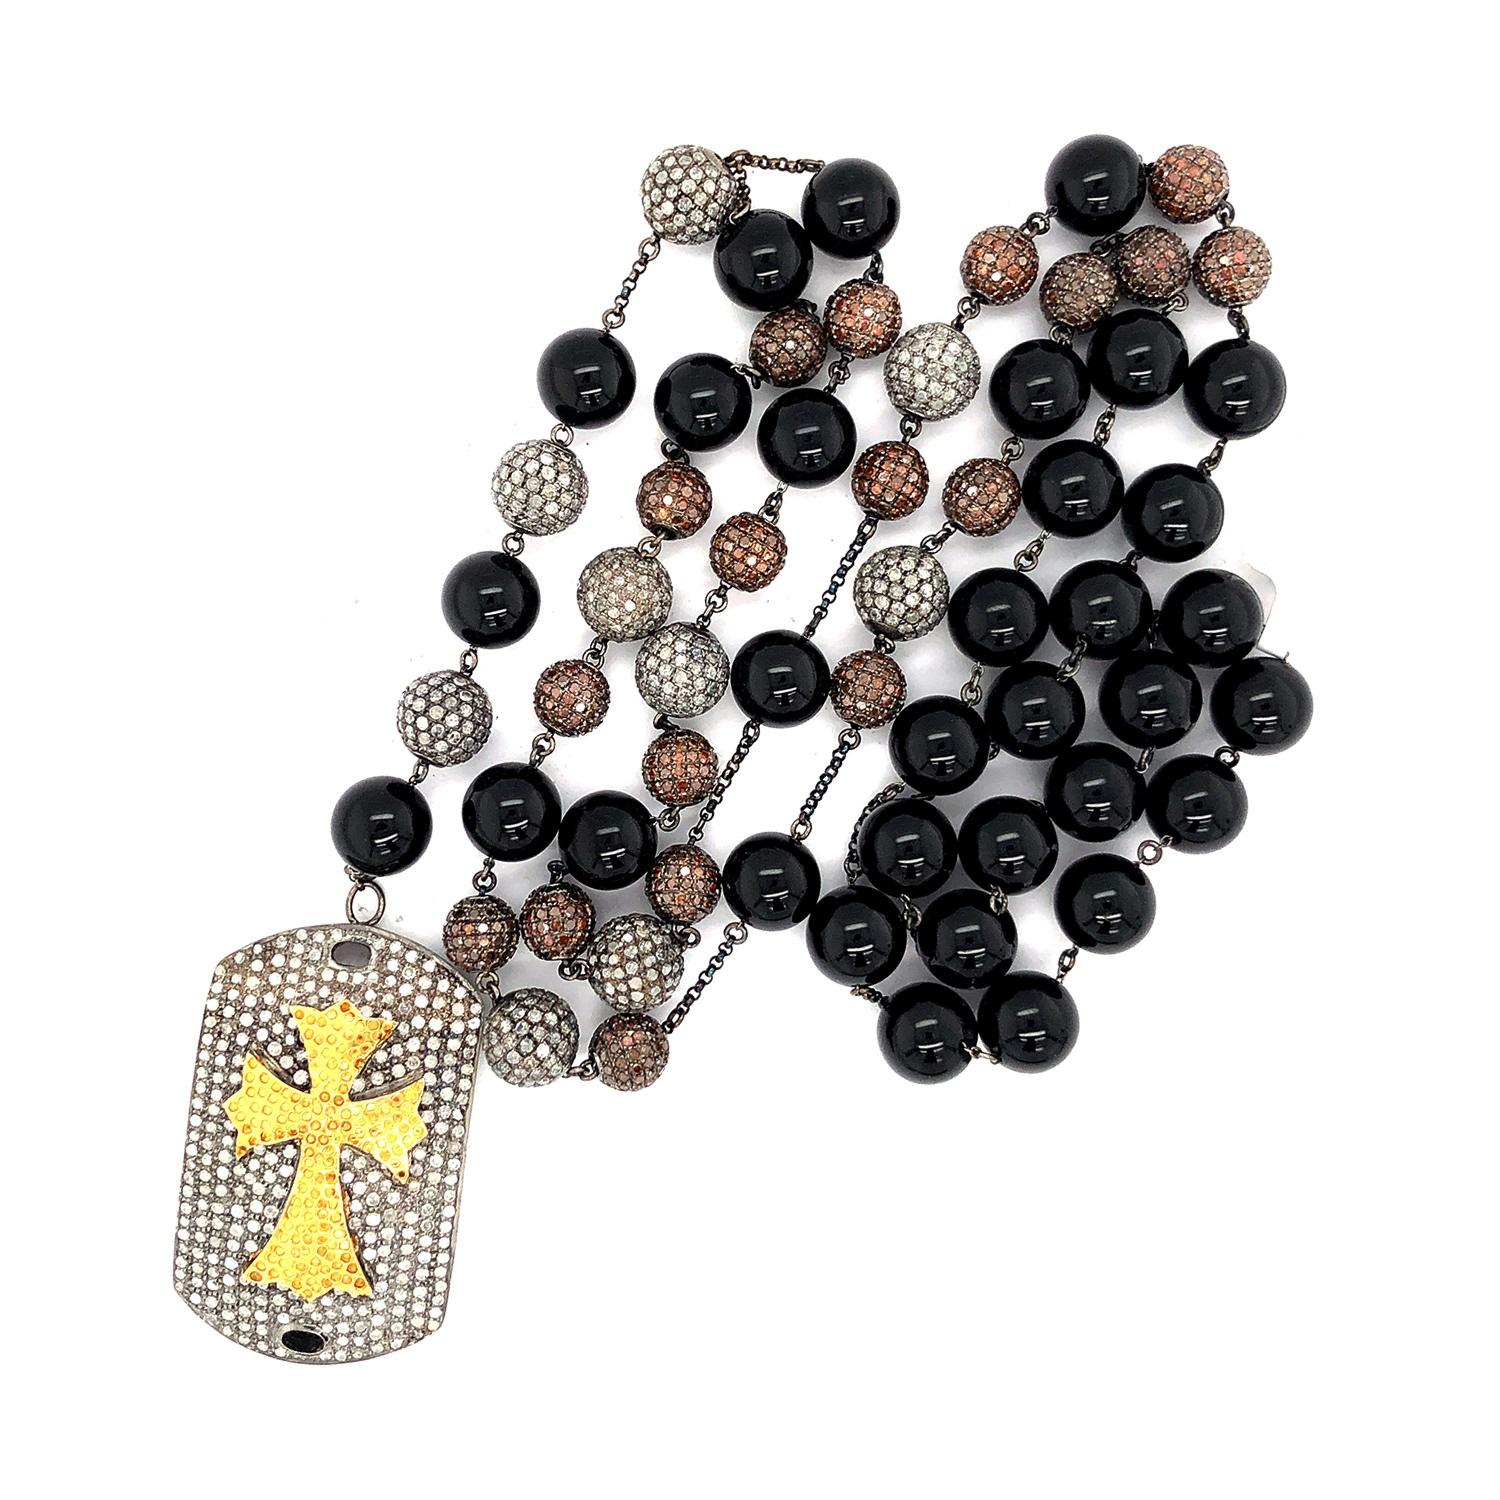 Mixed Cut Diamond Beads Onyx Necklace with Cross Design Pendant Made in Gold & Silver For Sale